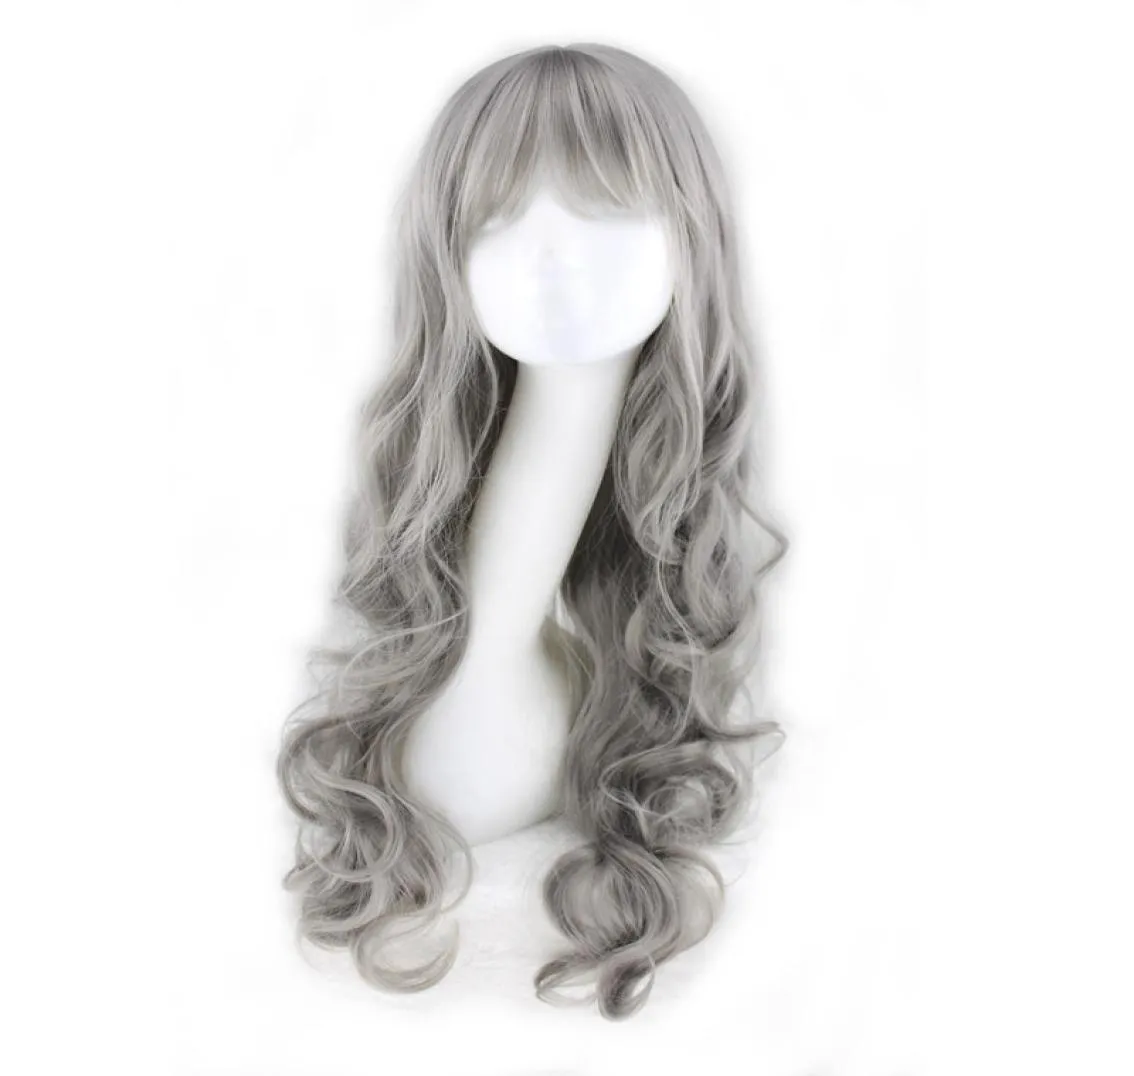 Woodfestival Wig Grey avec une frange soignée Long Curly synthétique Natural Wigs Wigs Grand-mère Grey Hair Women5427158